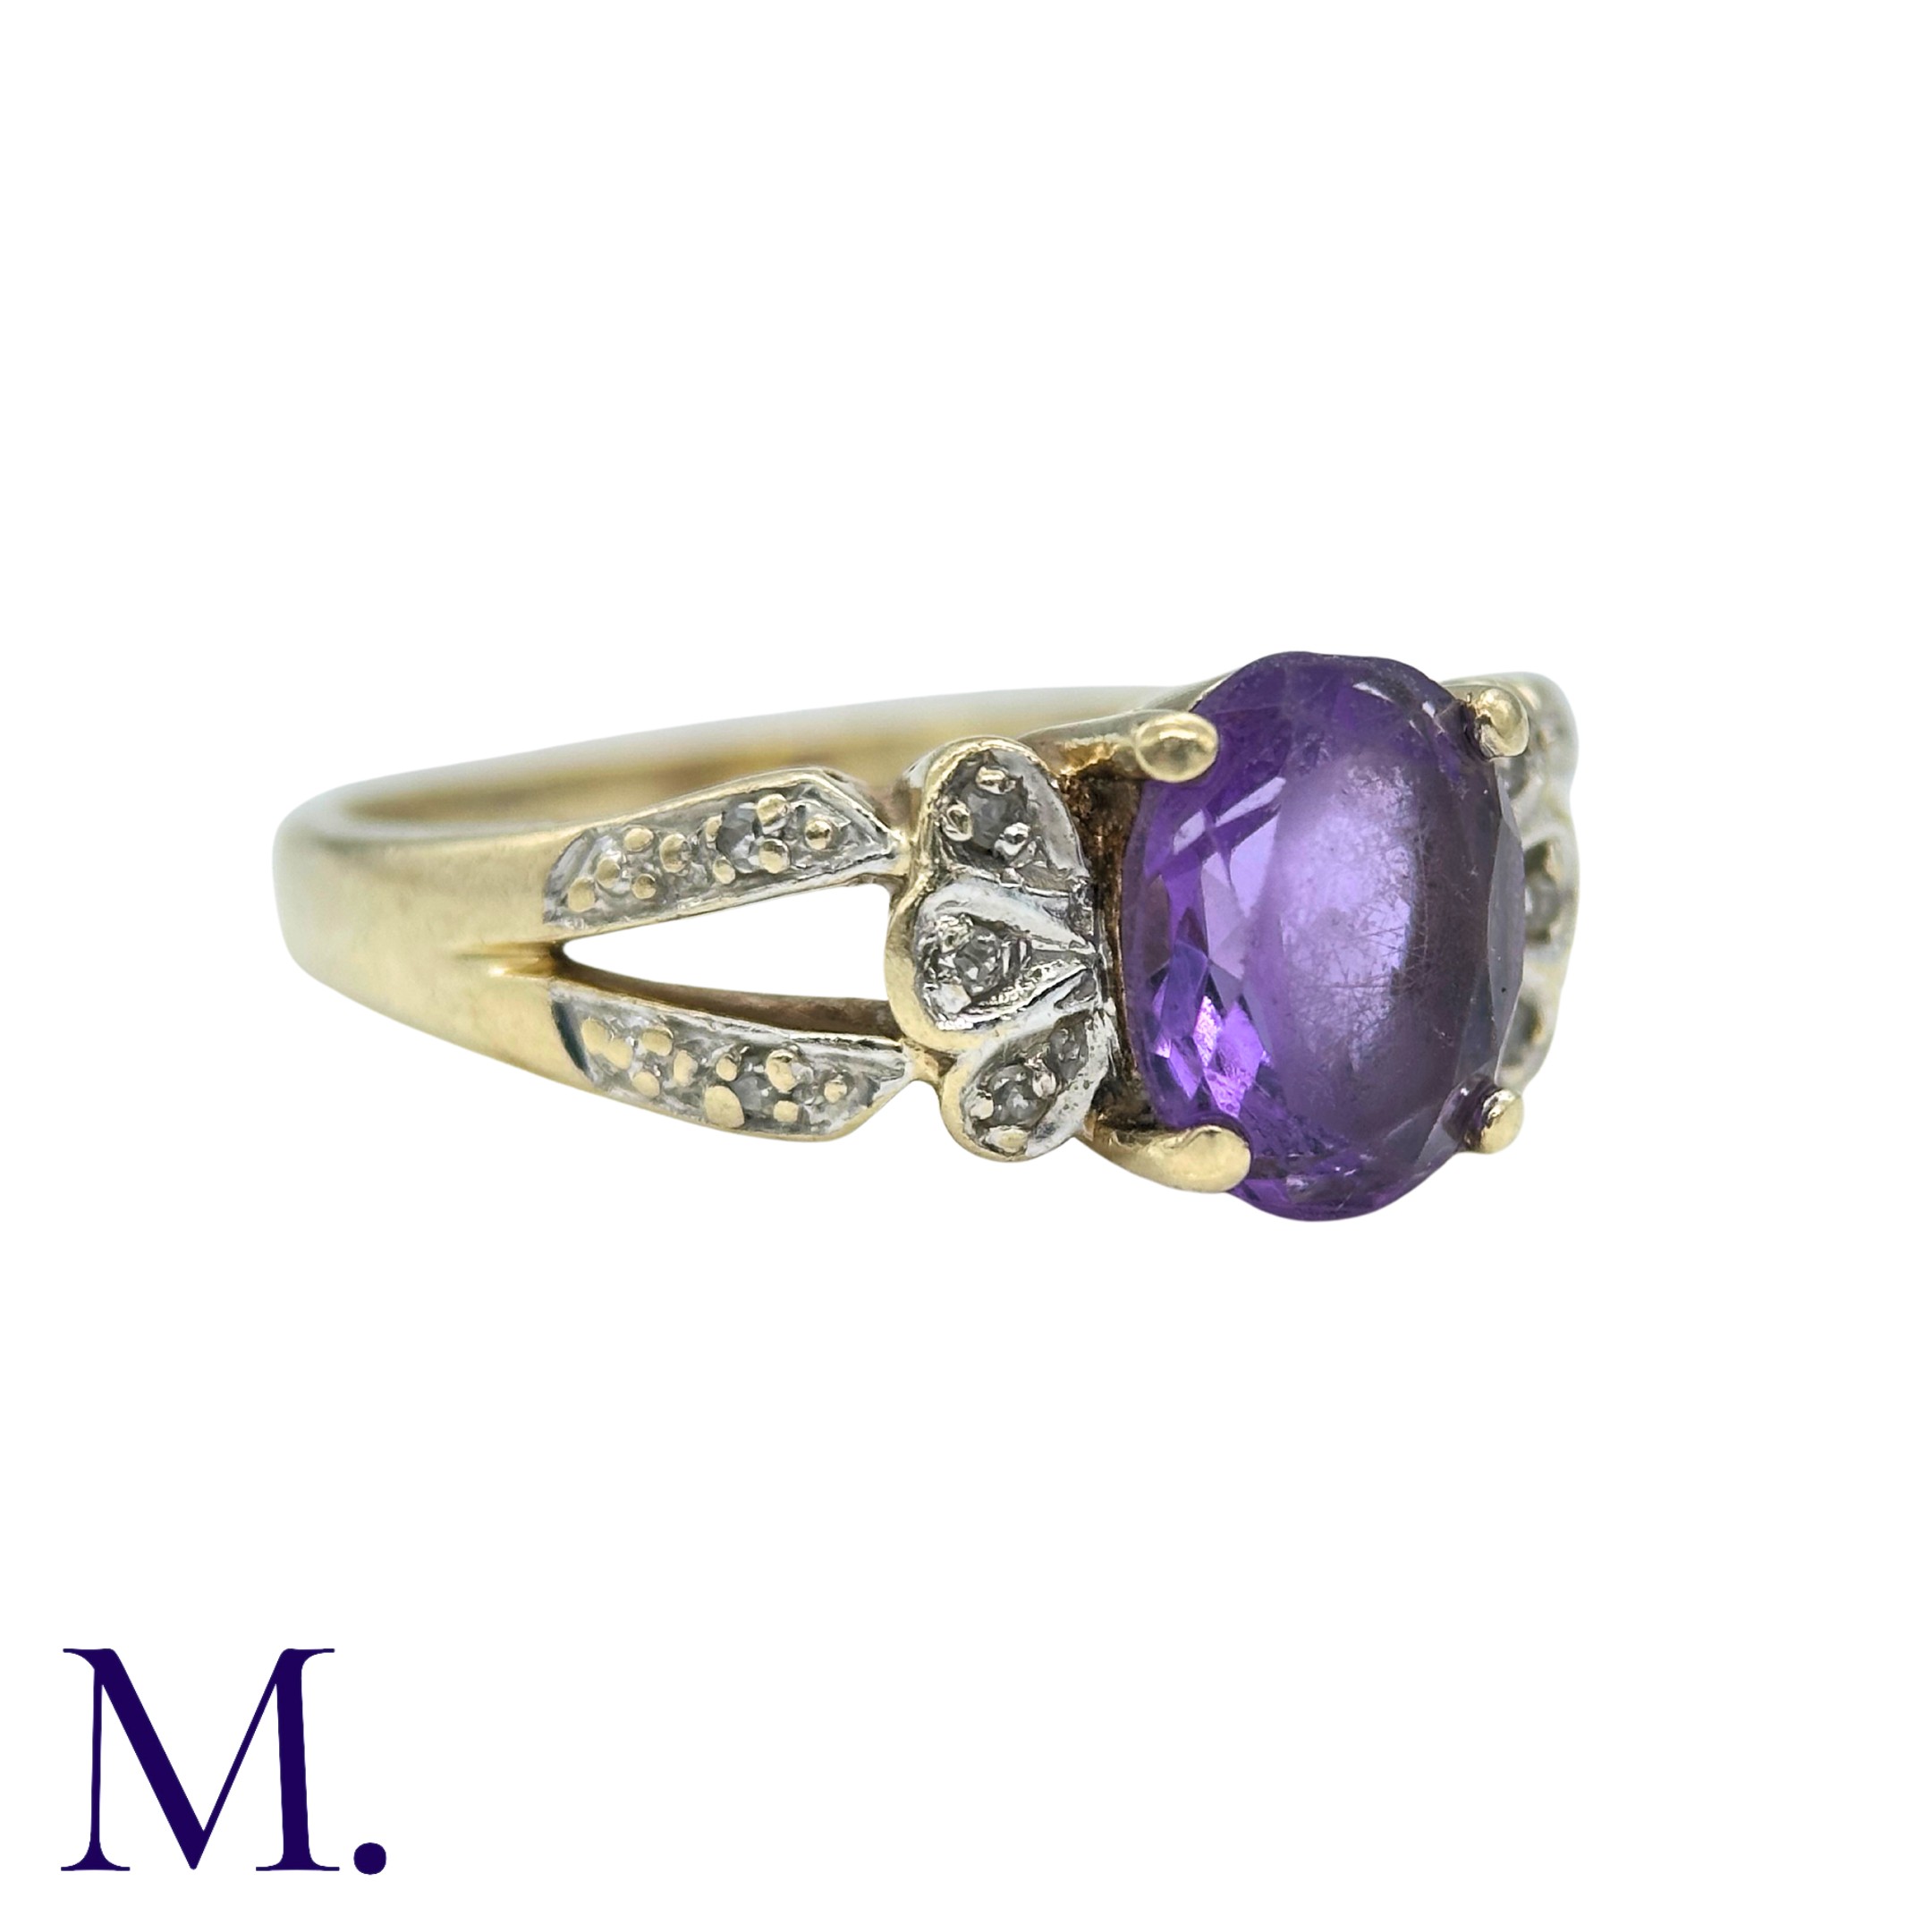 An Amethyst And Diamond Ring in 9k yellow gold, set with a central oval cut amethyst, accented by - Image 3 of 4